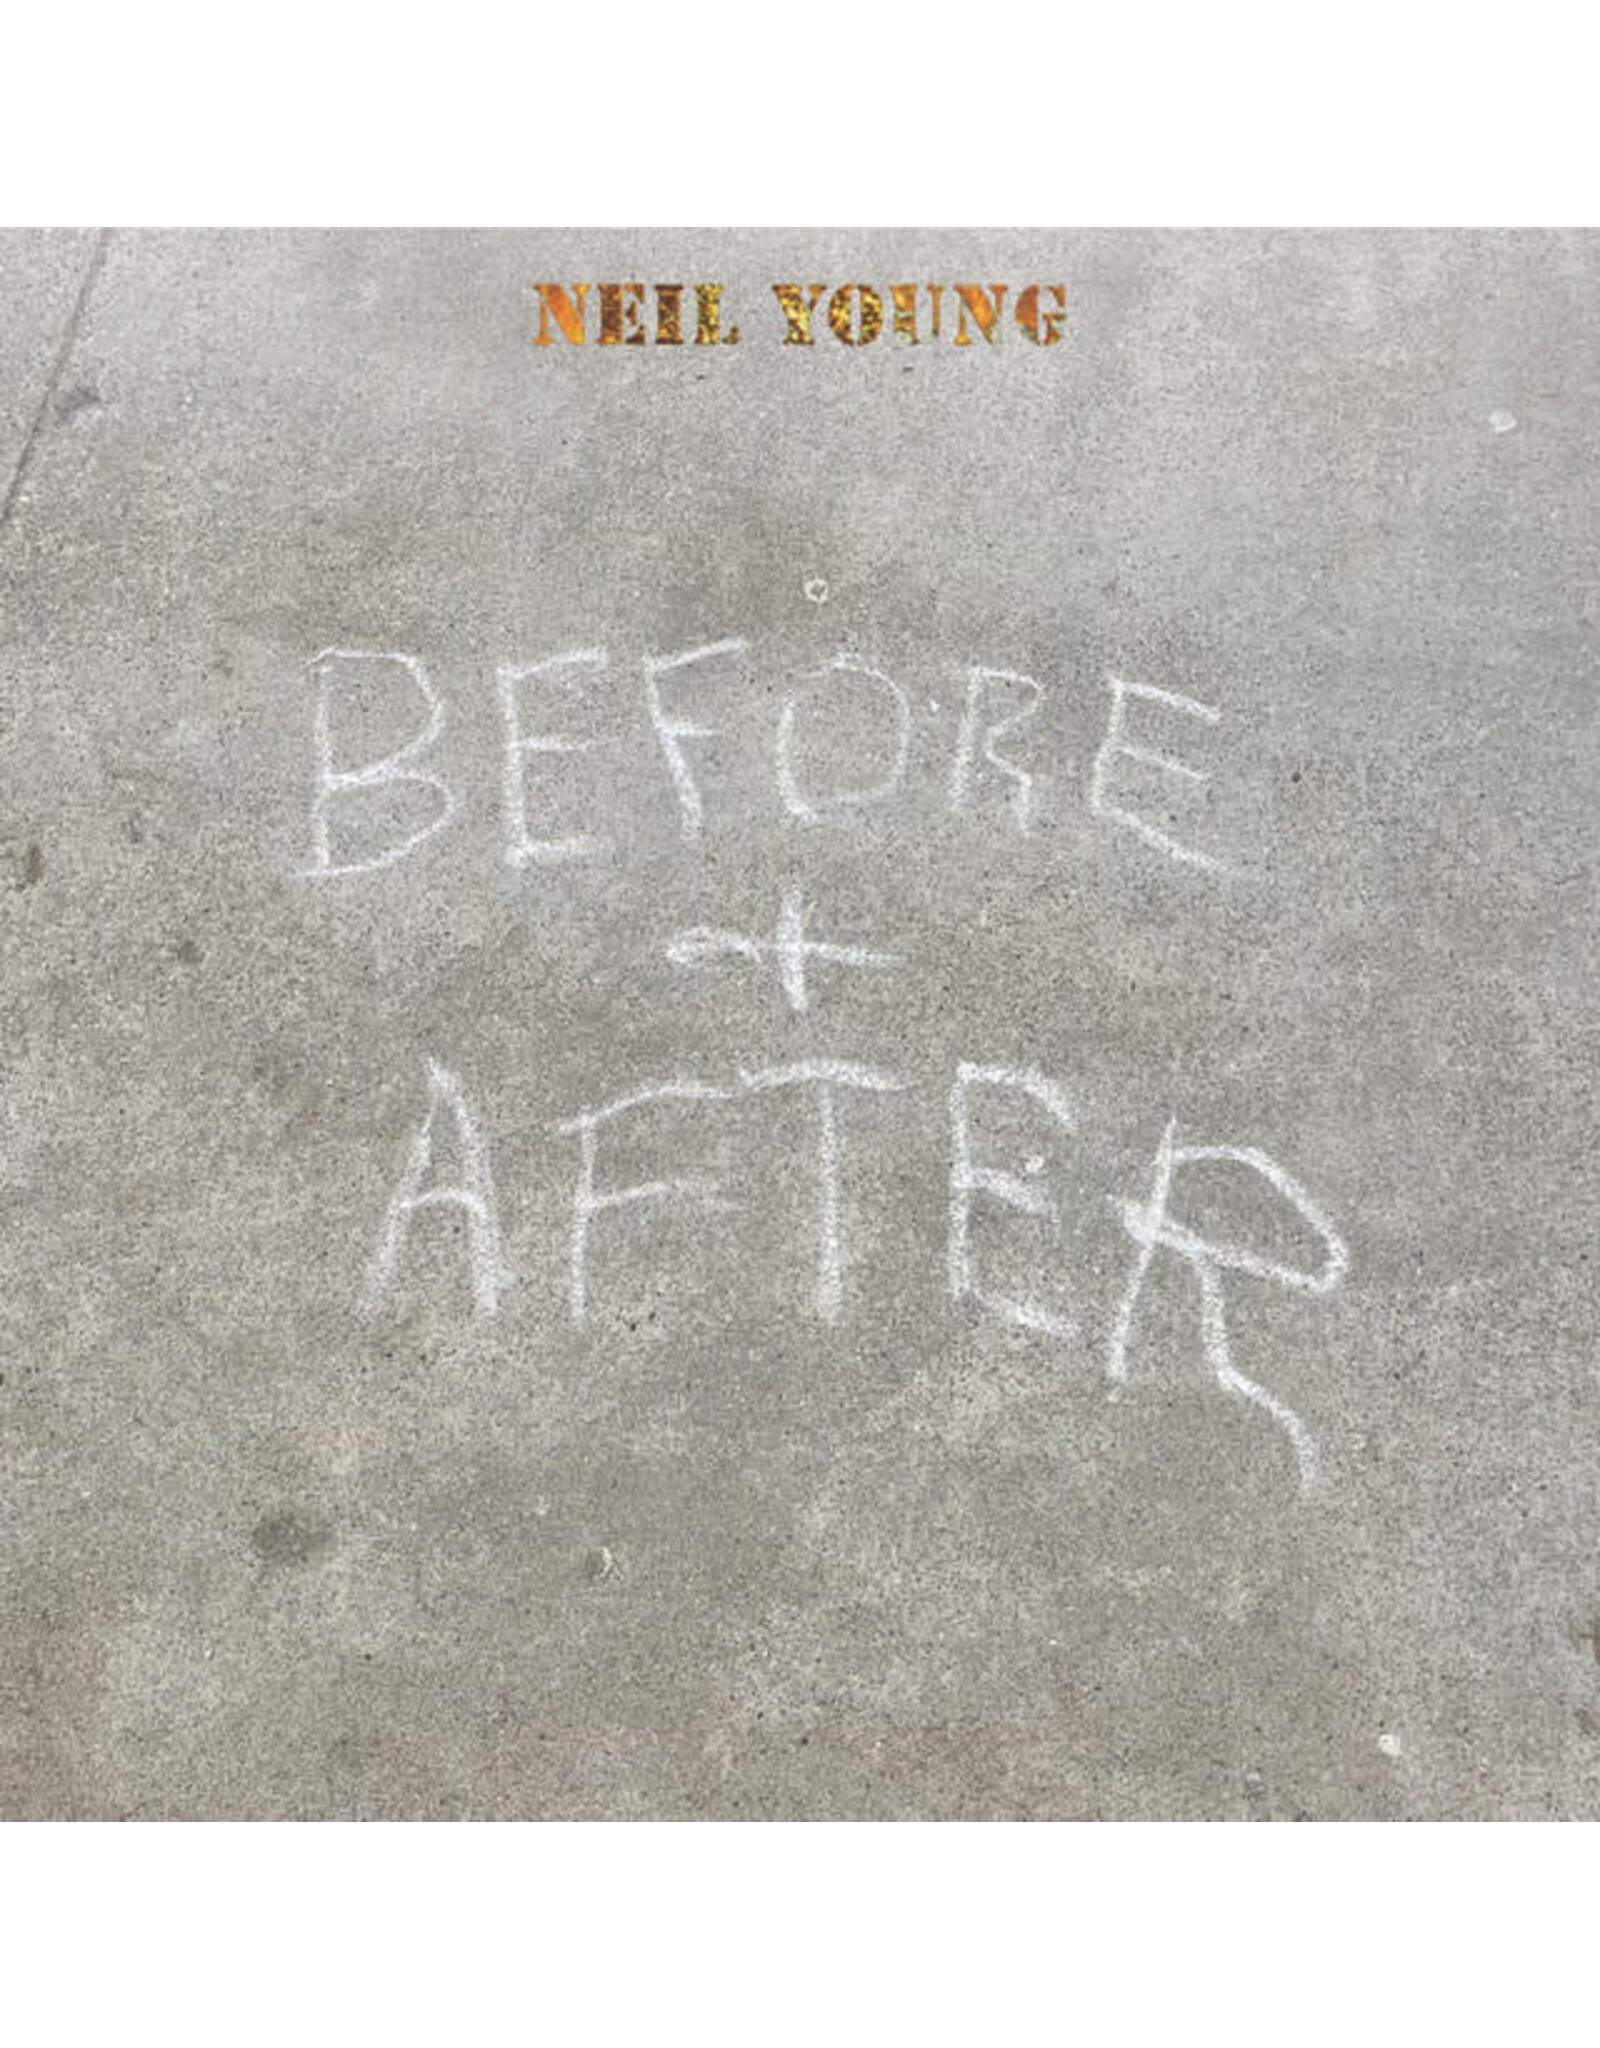 Reprise Young, Neil: Before & After (Clear) LP